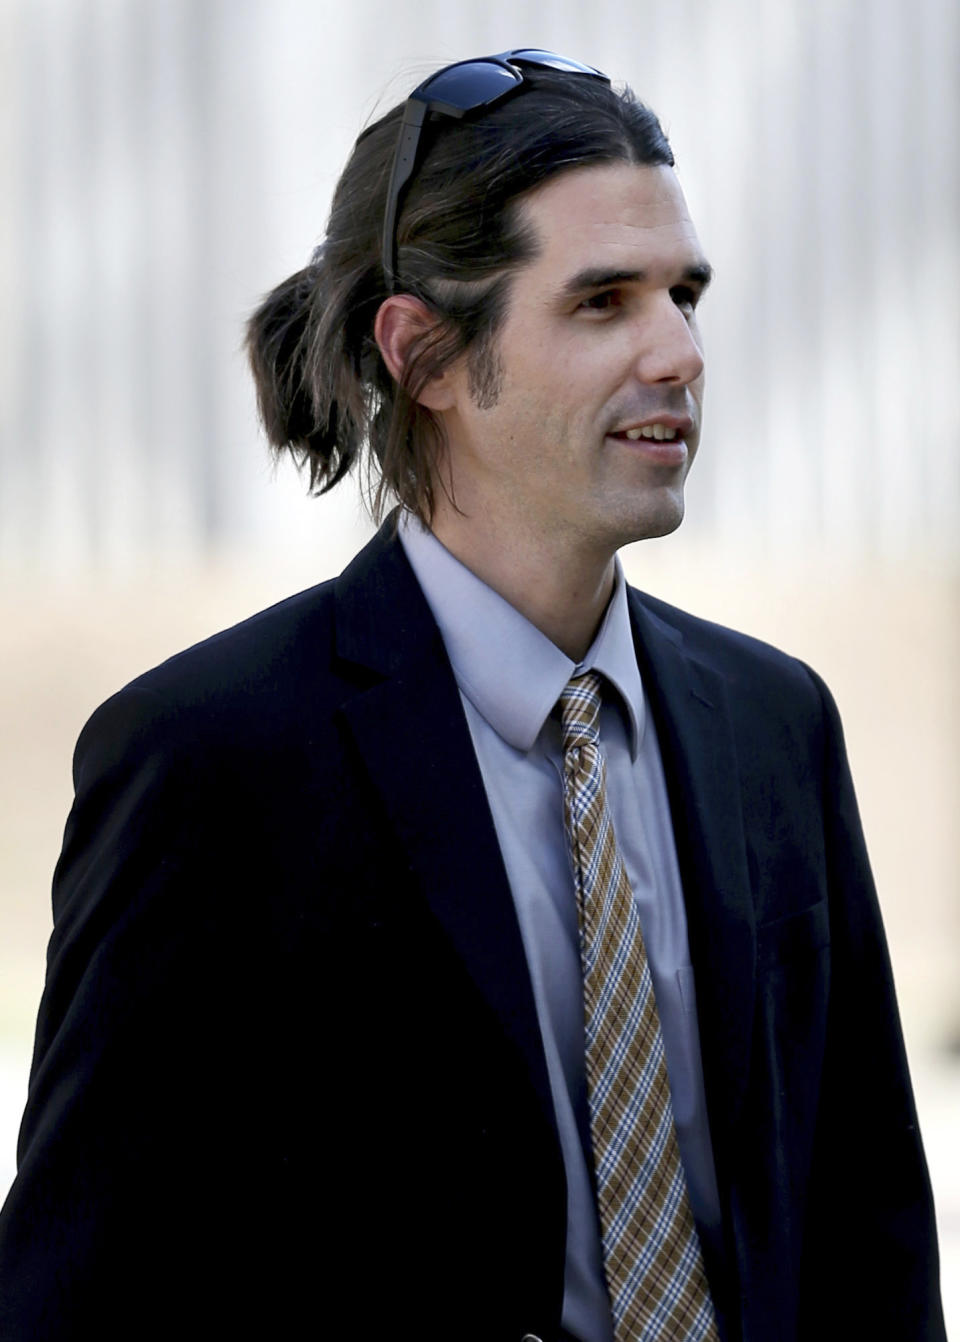 In this 2018 photo, Scott Daniel Warren, who is charged with human smuggling walks in to U.S. District Court in Tucson, Ariz. Warren, a border activist charged with helping a pair of migrants with water, food and lodging, is set to go on trial on Wednesday, May 29, 2019, in U.S. court in Arizona. (Kelly Presnell/Arizona Daily Star via AP)